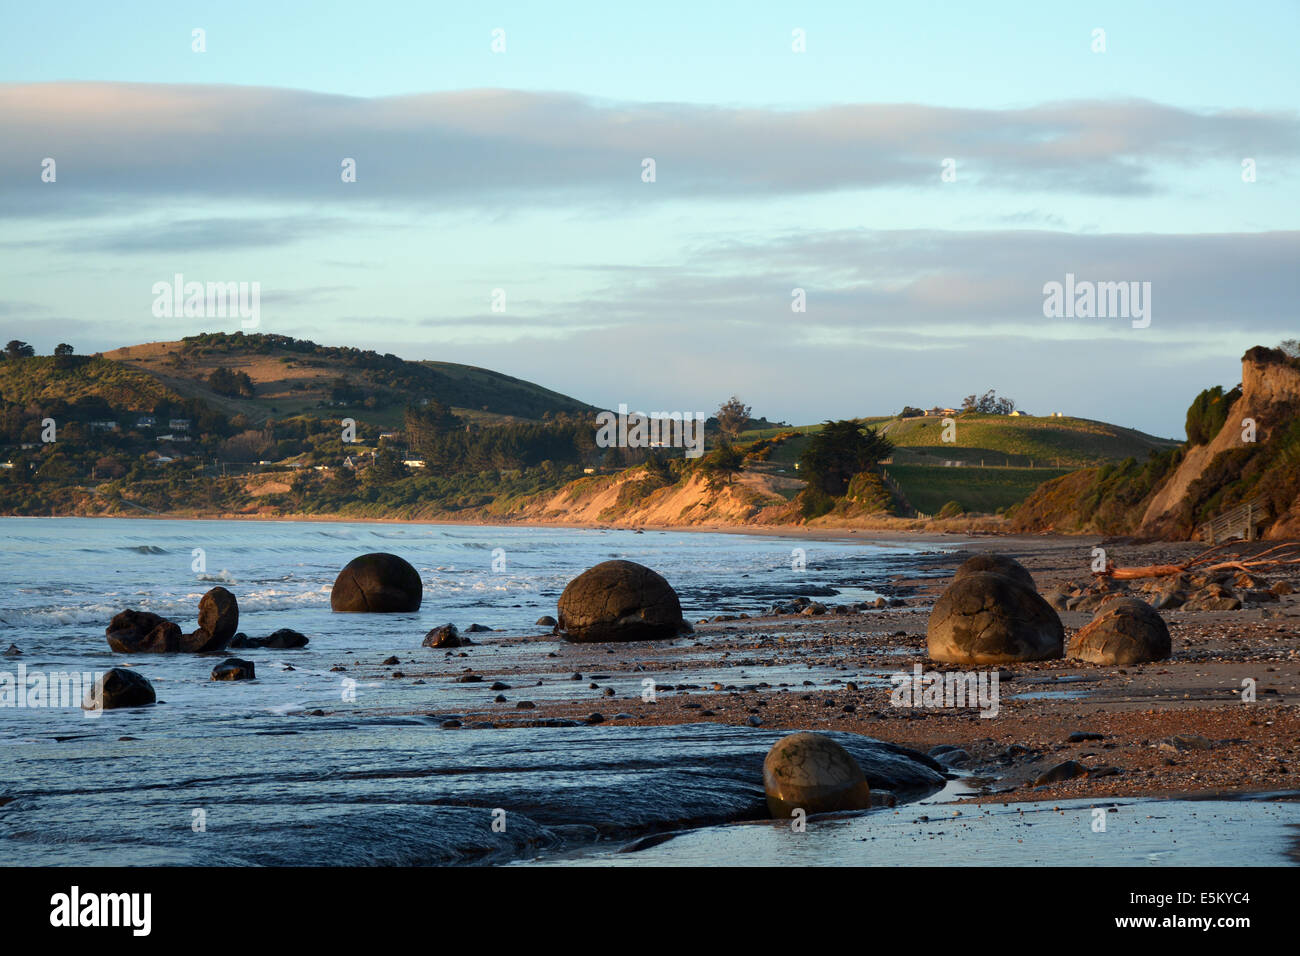 A giant ball shaped boulder almost covered in sand on the beach at Moeraki  South Island New Zealand Stock Photo - Alamy, boulder ball 